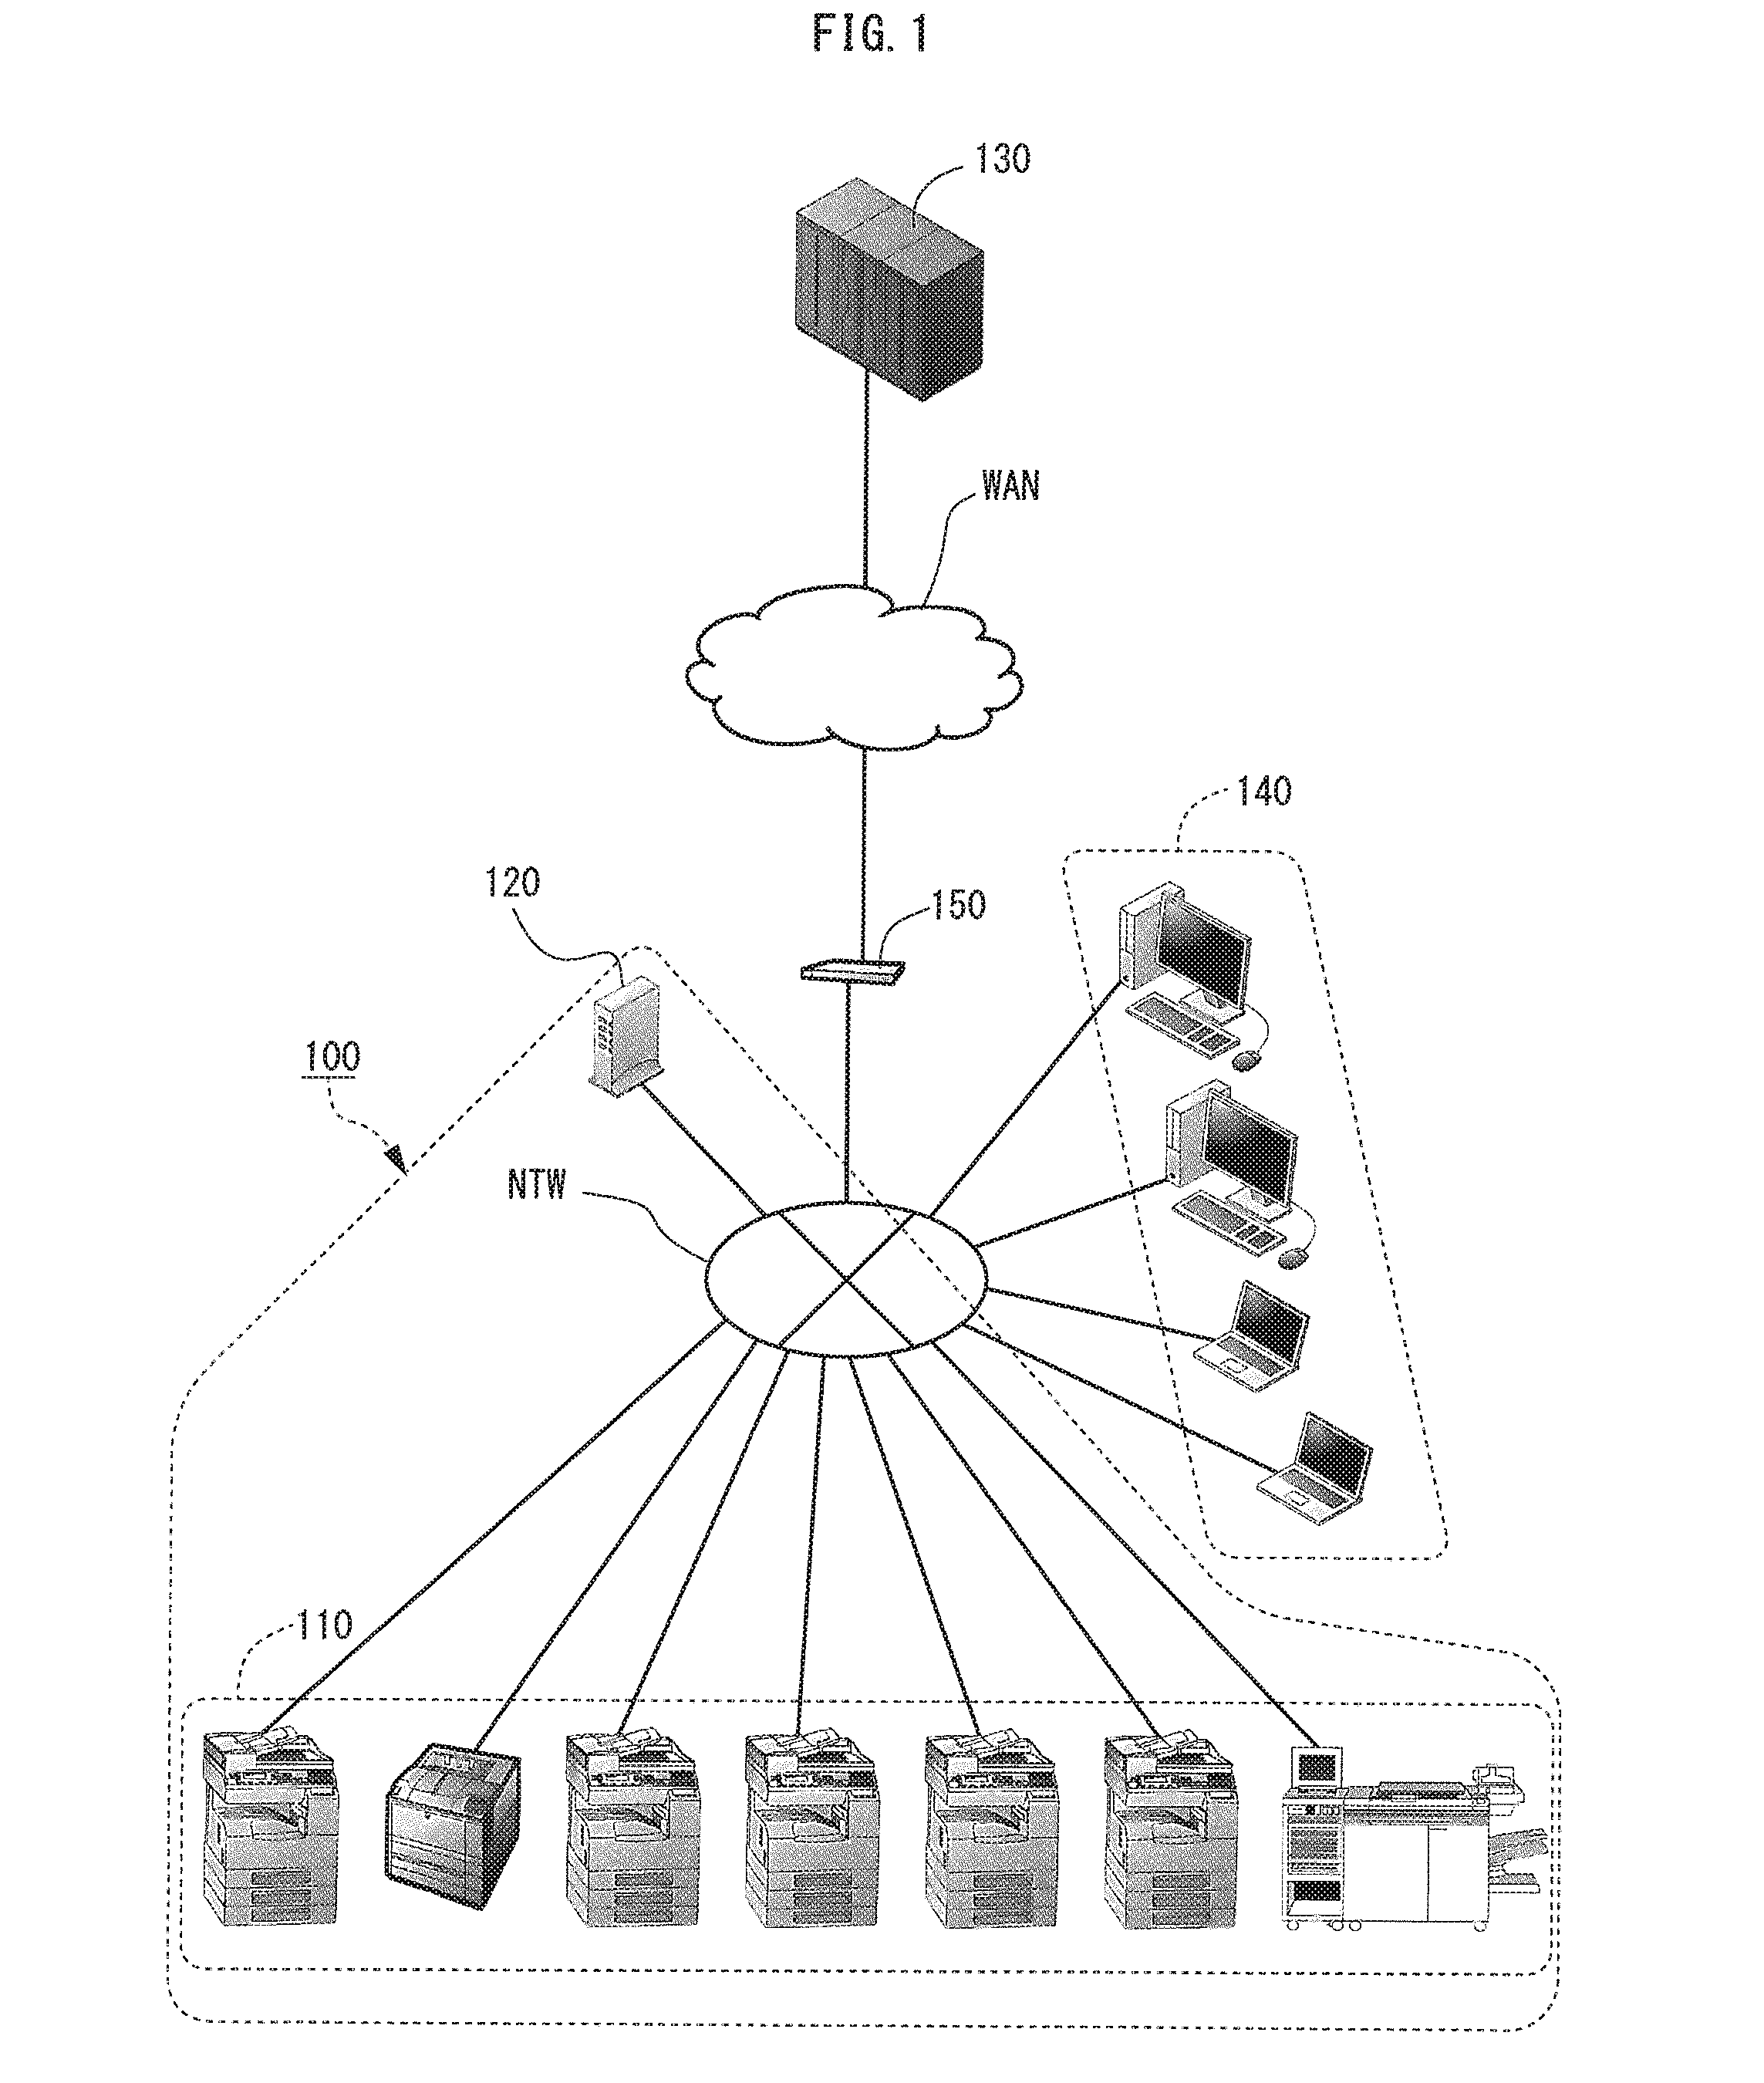 Image forming device and device, system, recording medium with program codes for managing consumables in image forming device